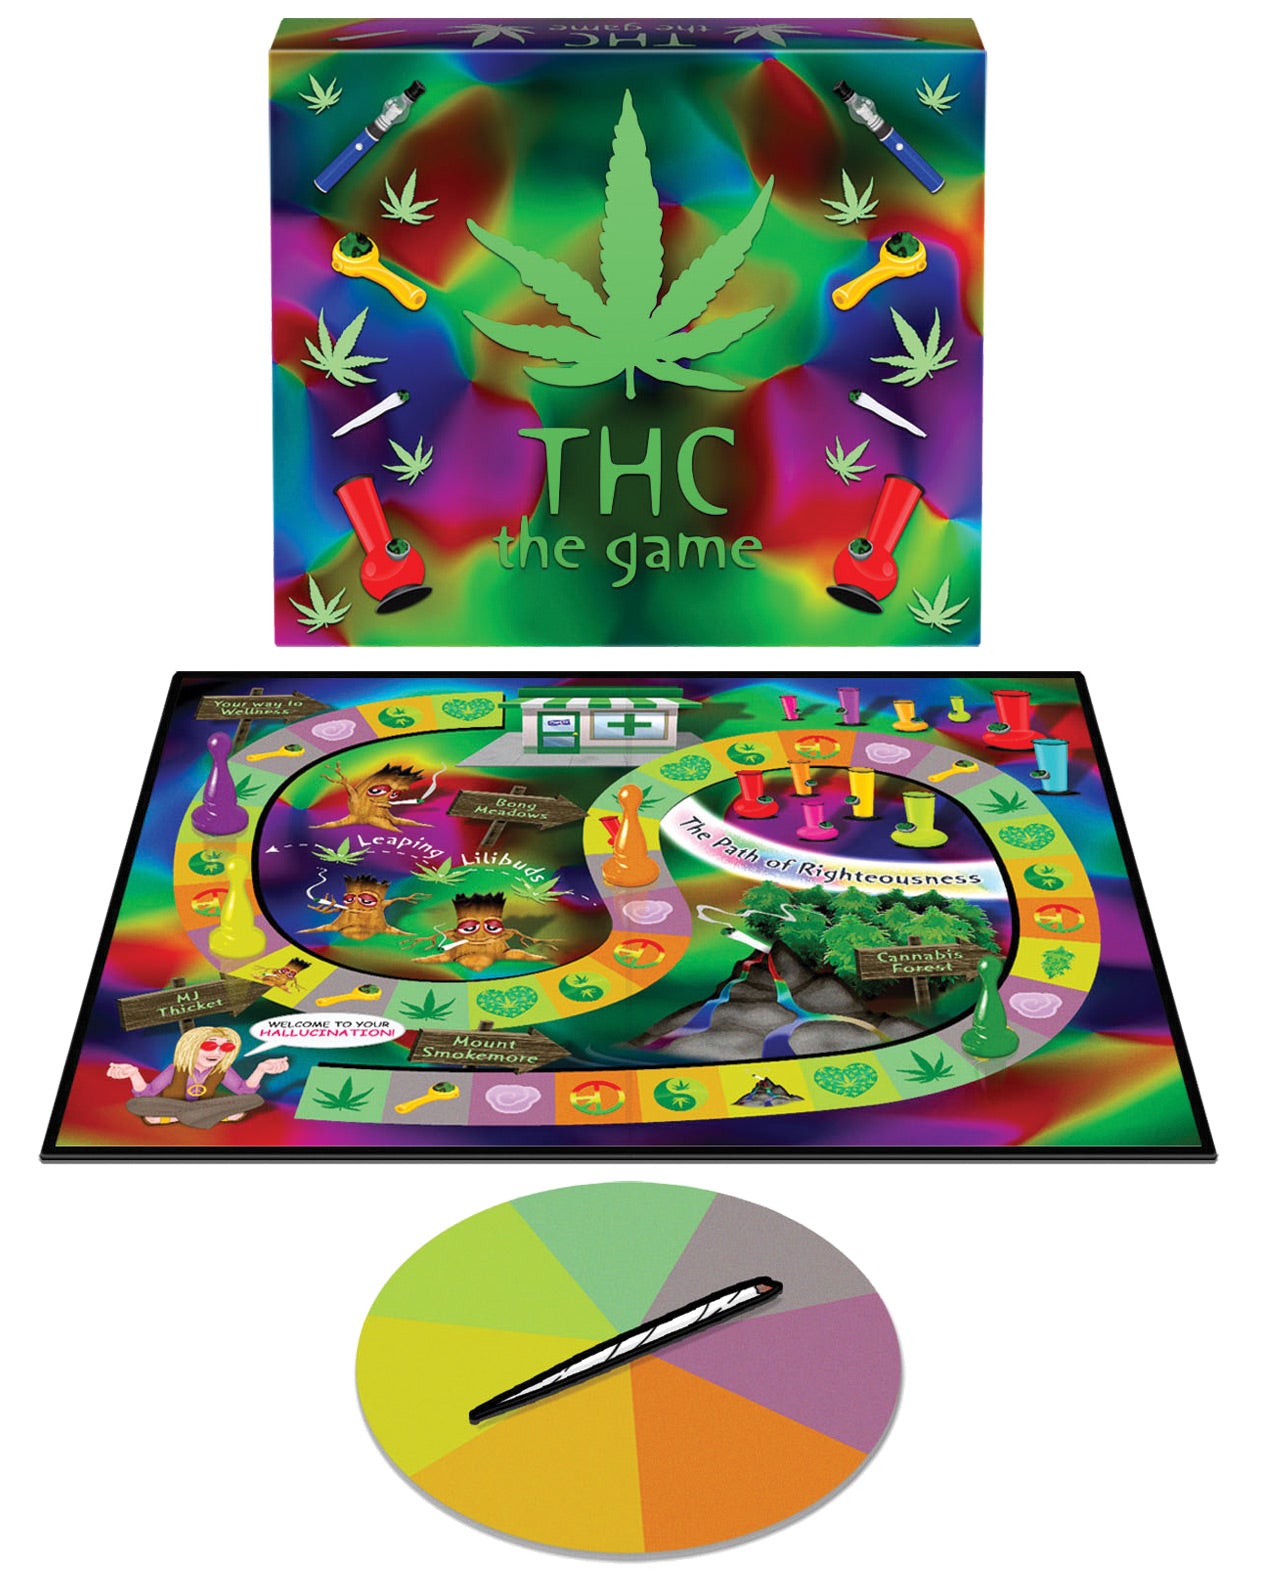 Thc The Game - LUST Depot